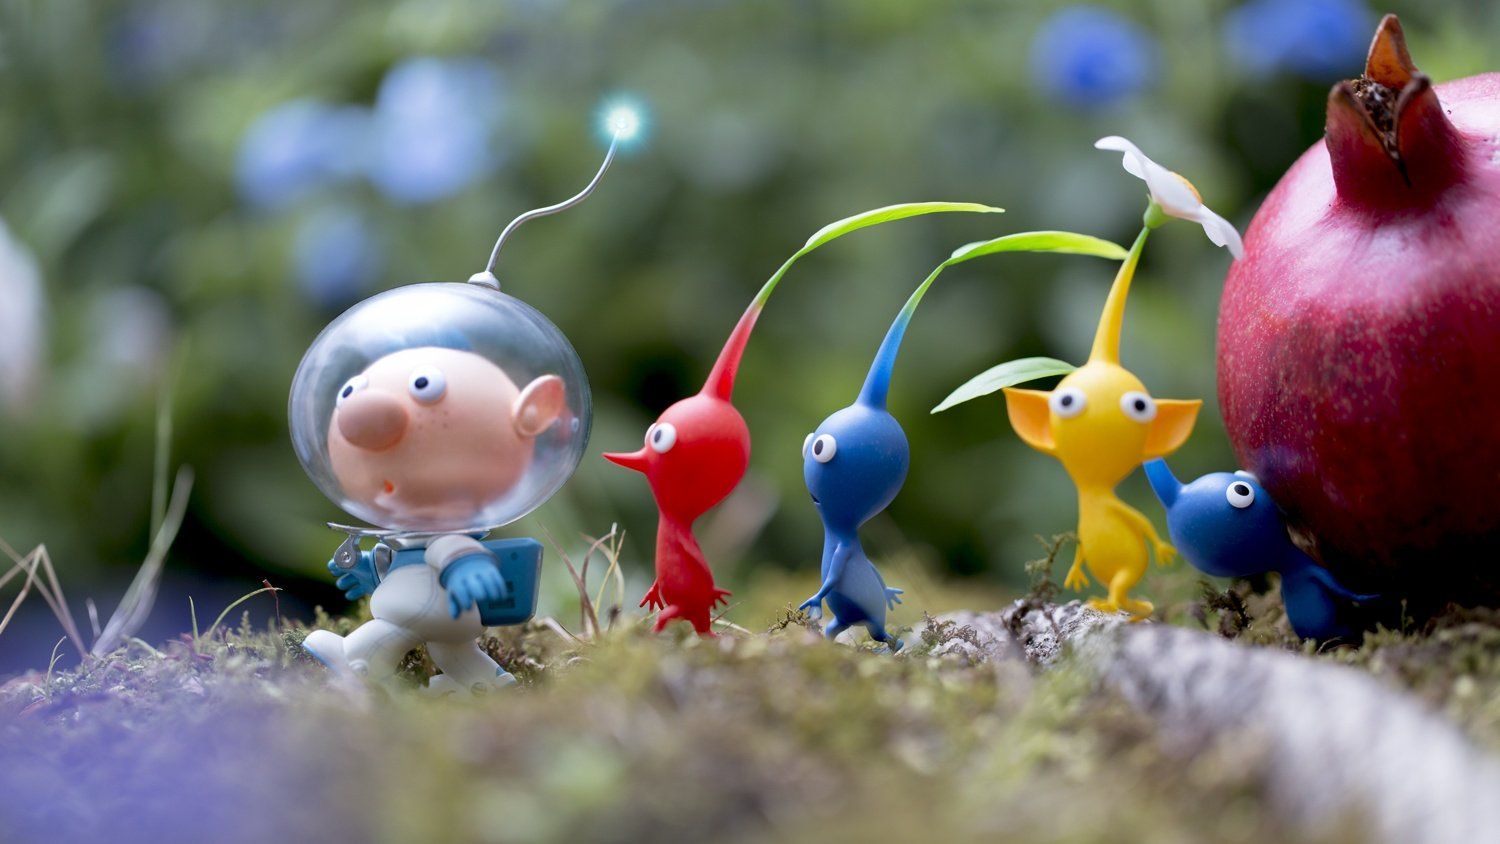 Pikmin 3 Deluxe: 19 Glorious Screenshots, Box Art, File Size And More Details